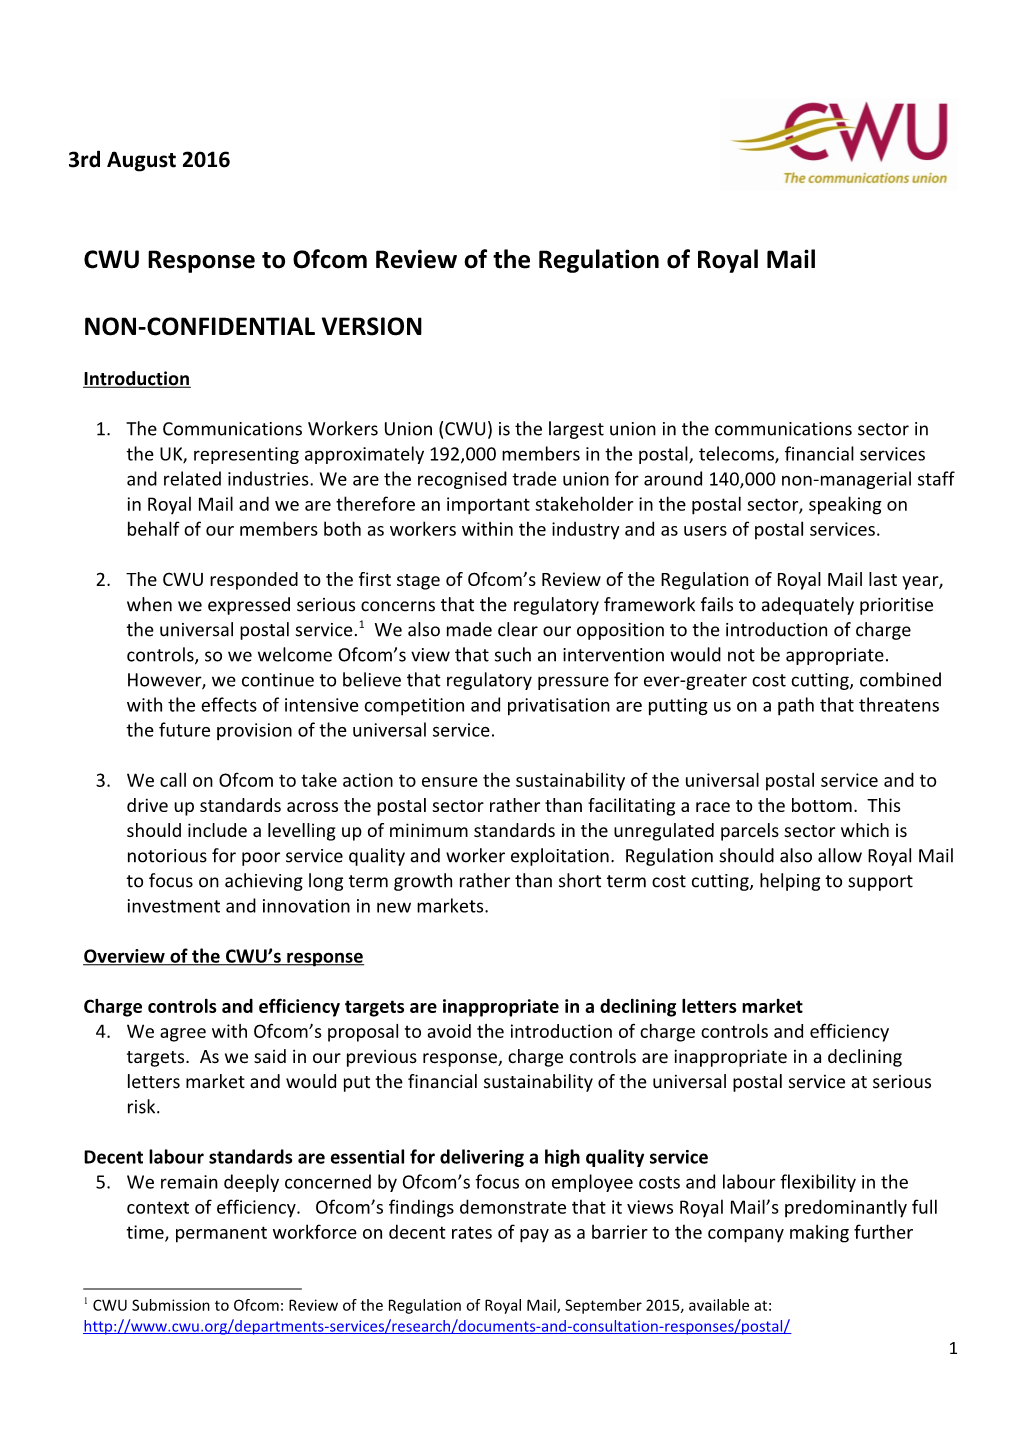 CWU Response to Ofcom Review of the Regulation of Royal Mail